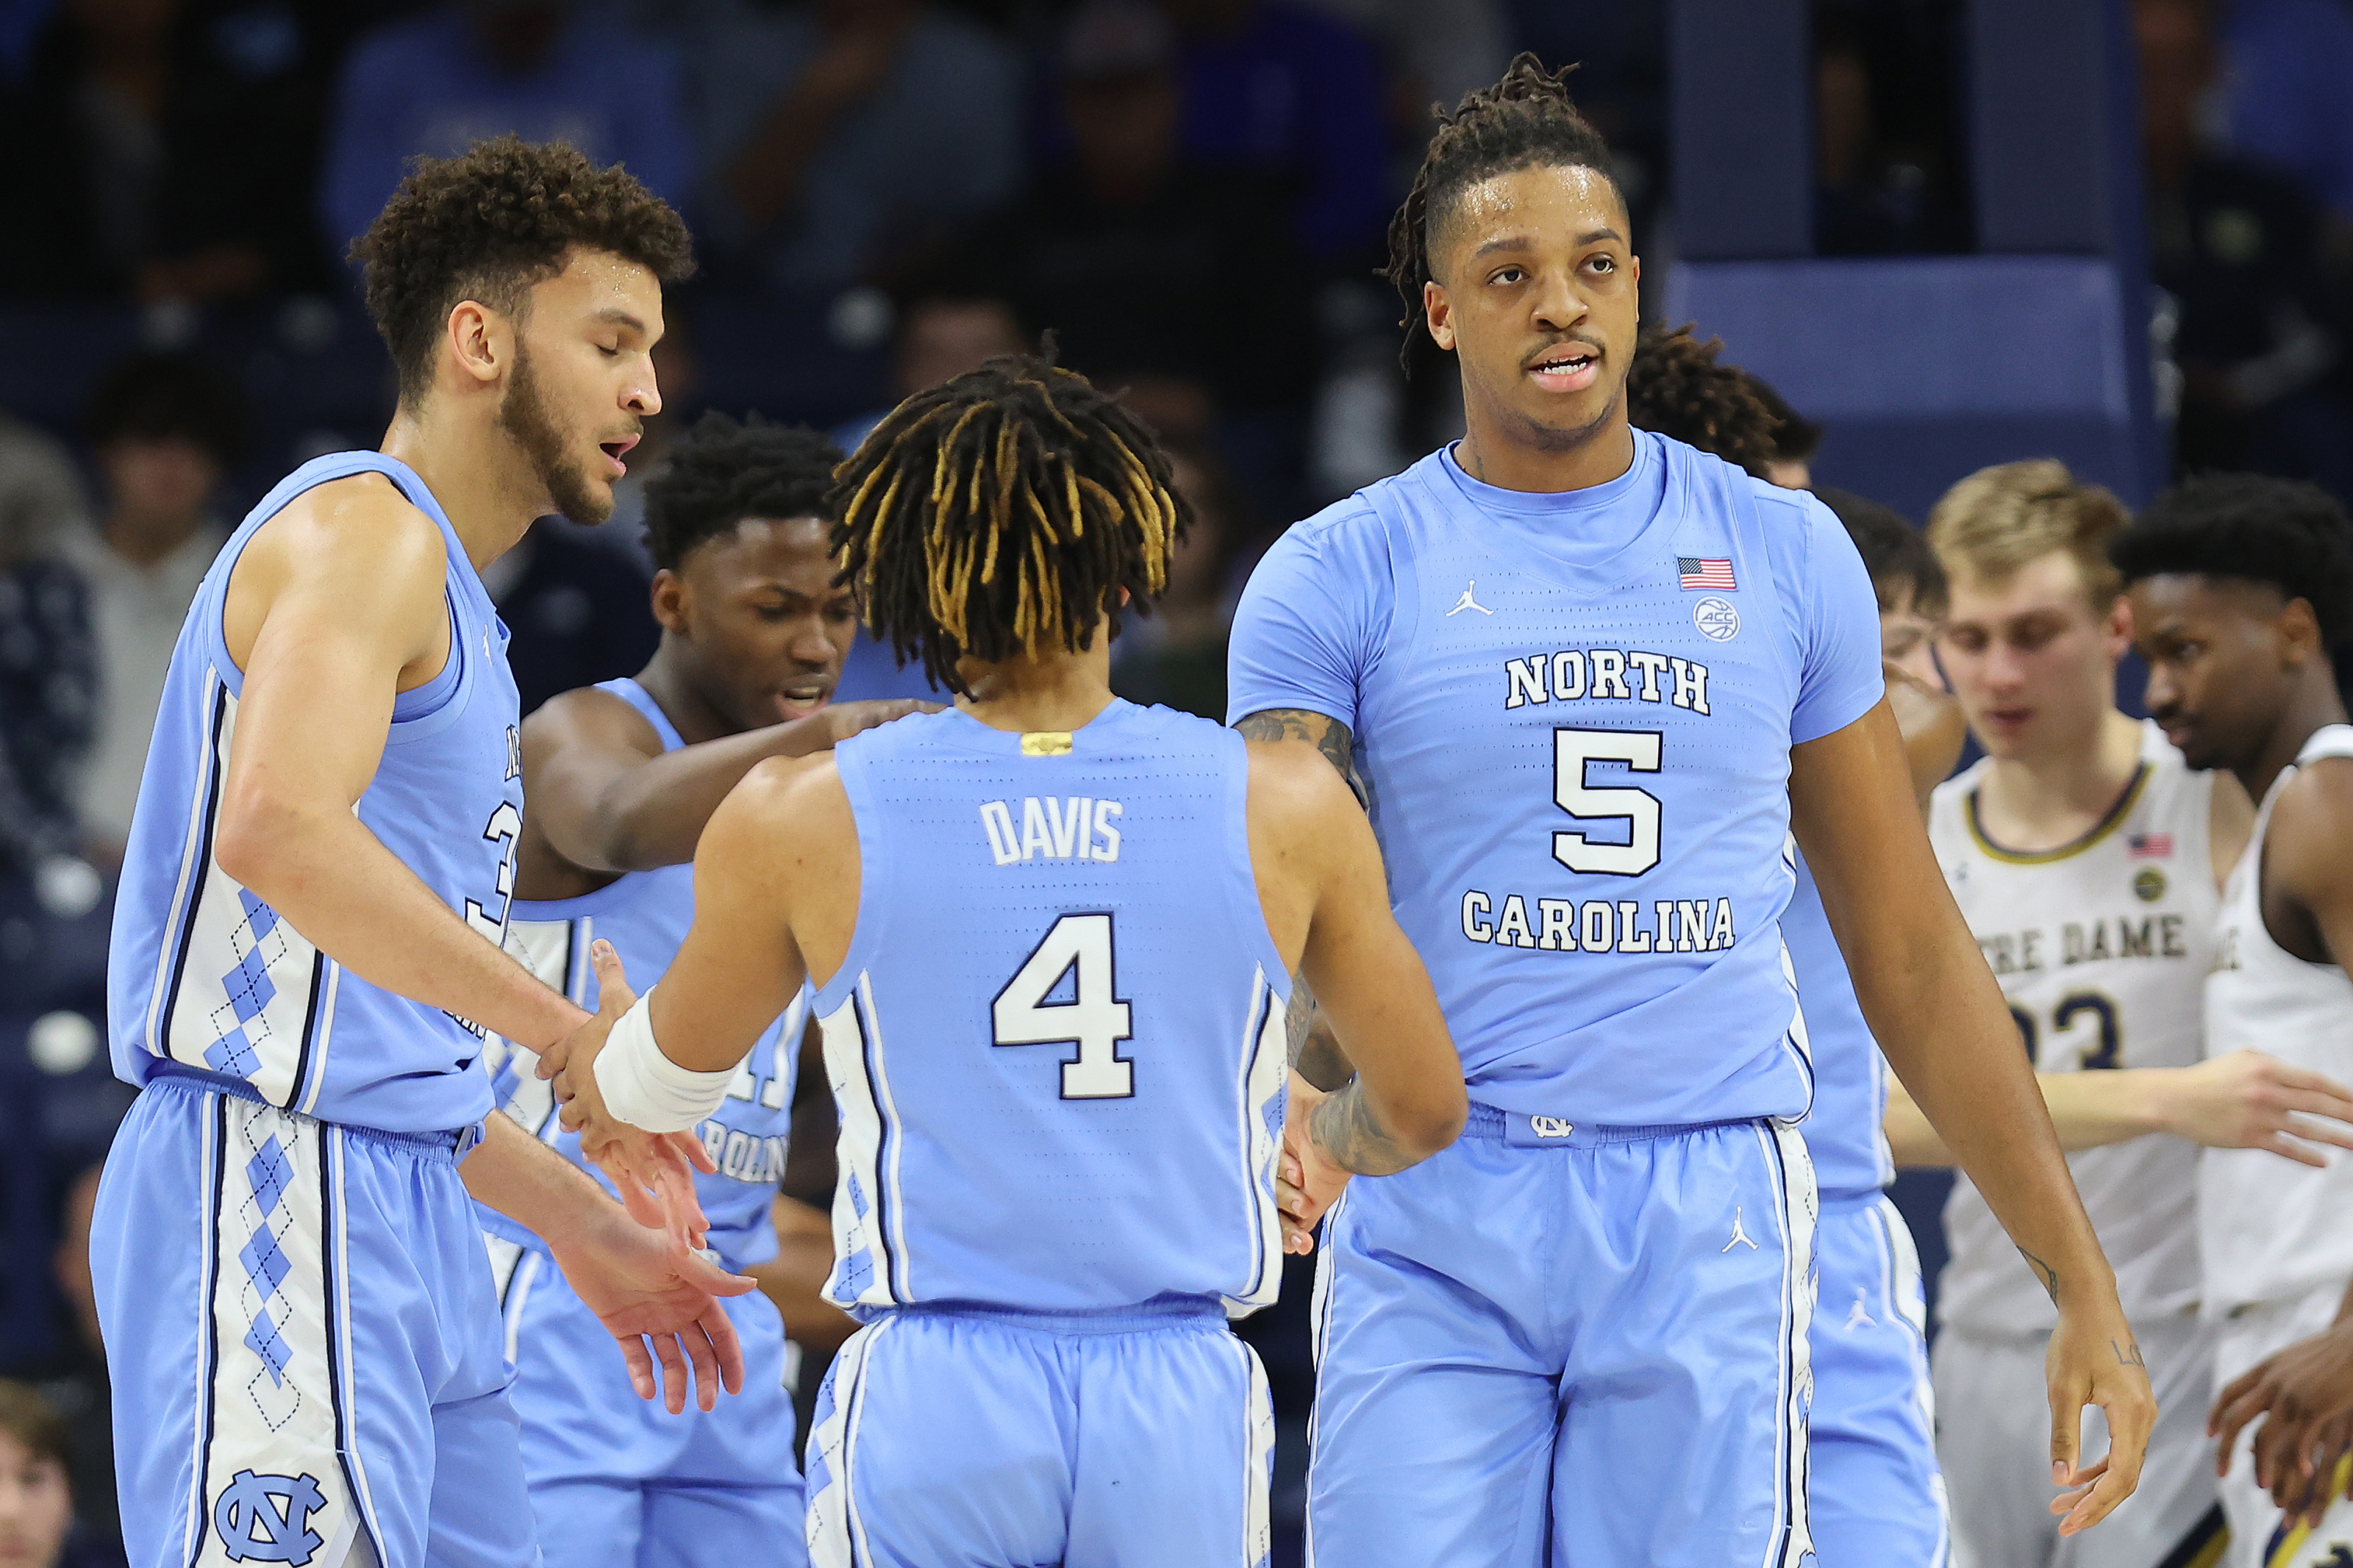 UNC Basketball wins ugly at Notre Dame to keep hope alive